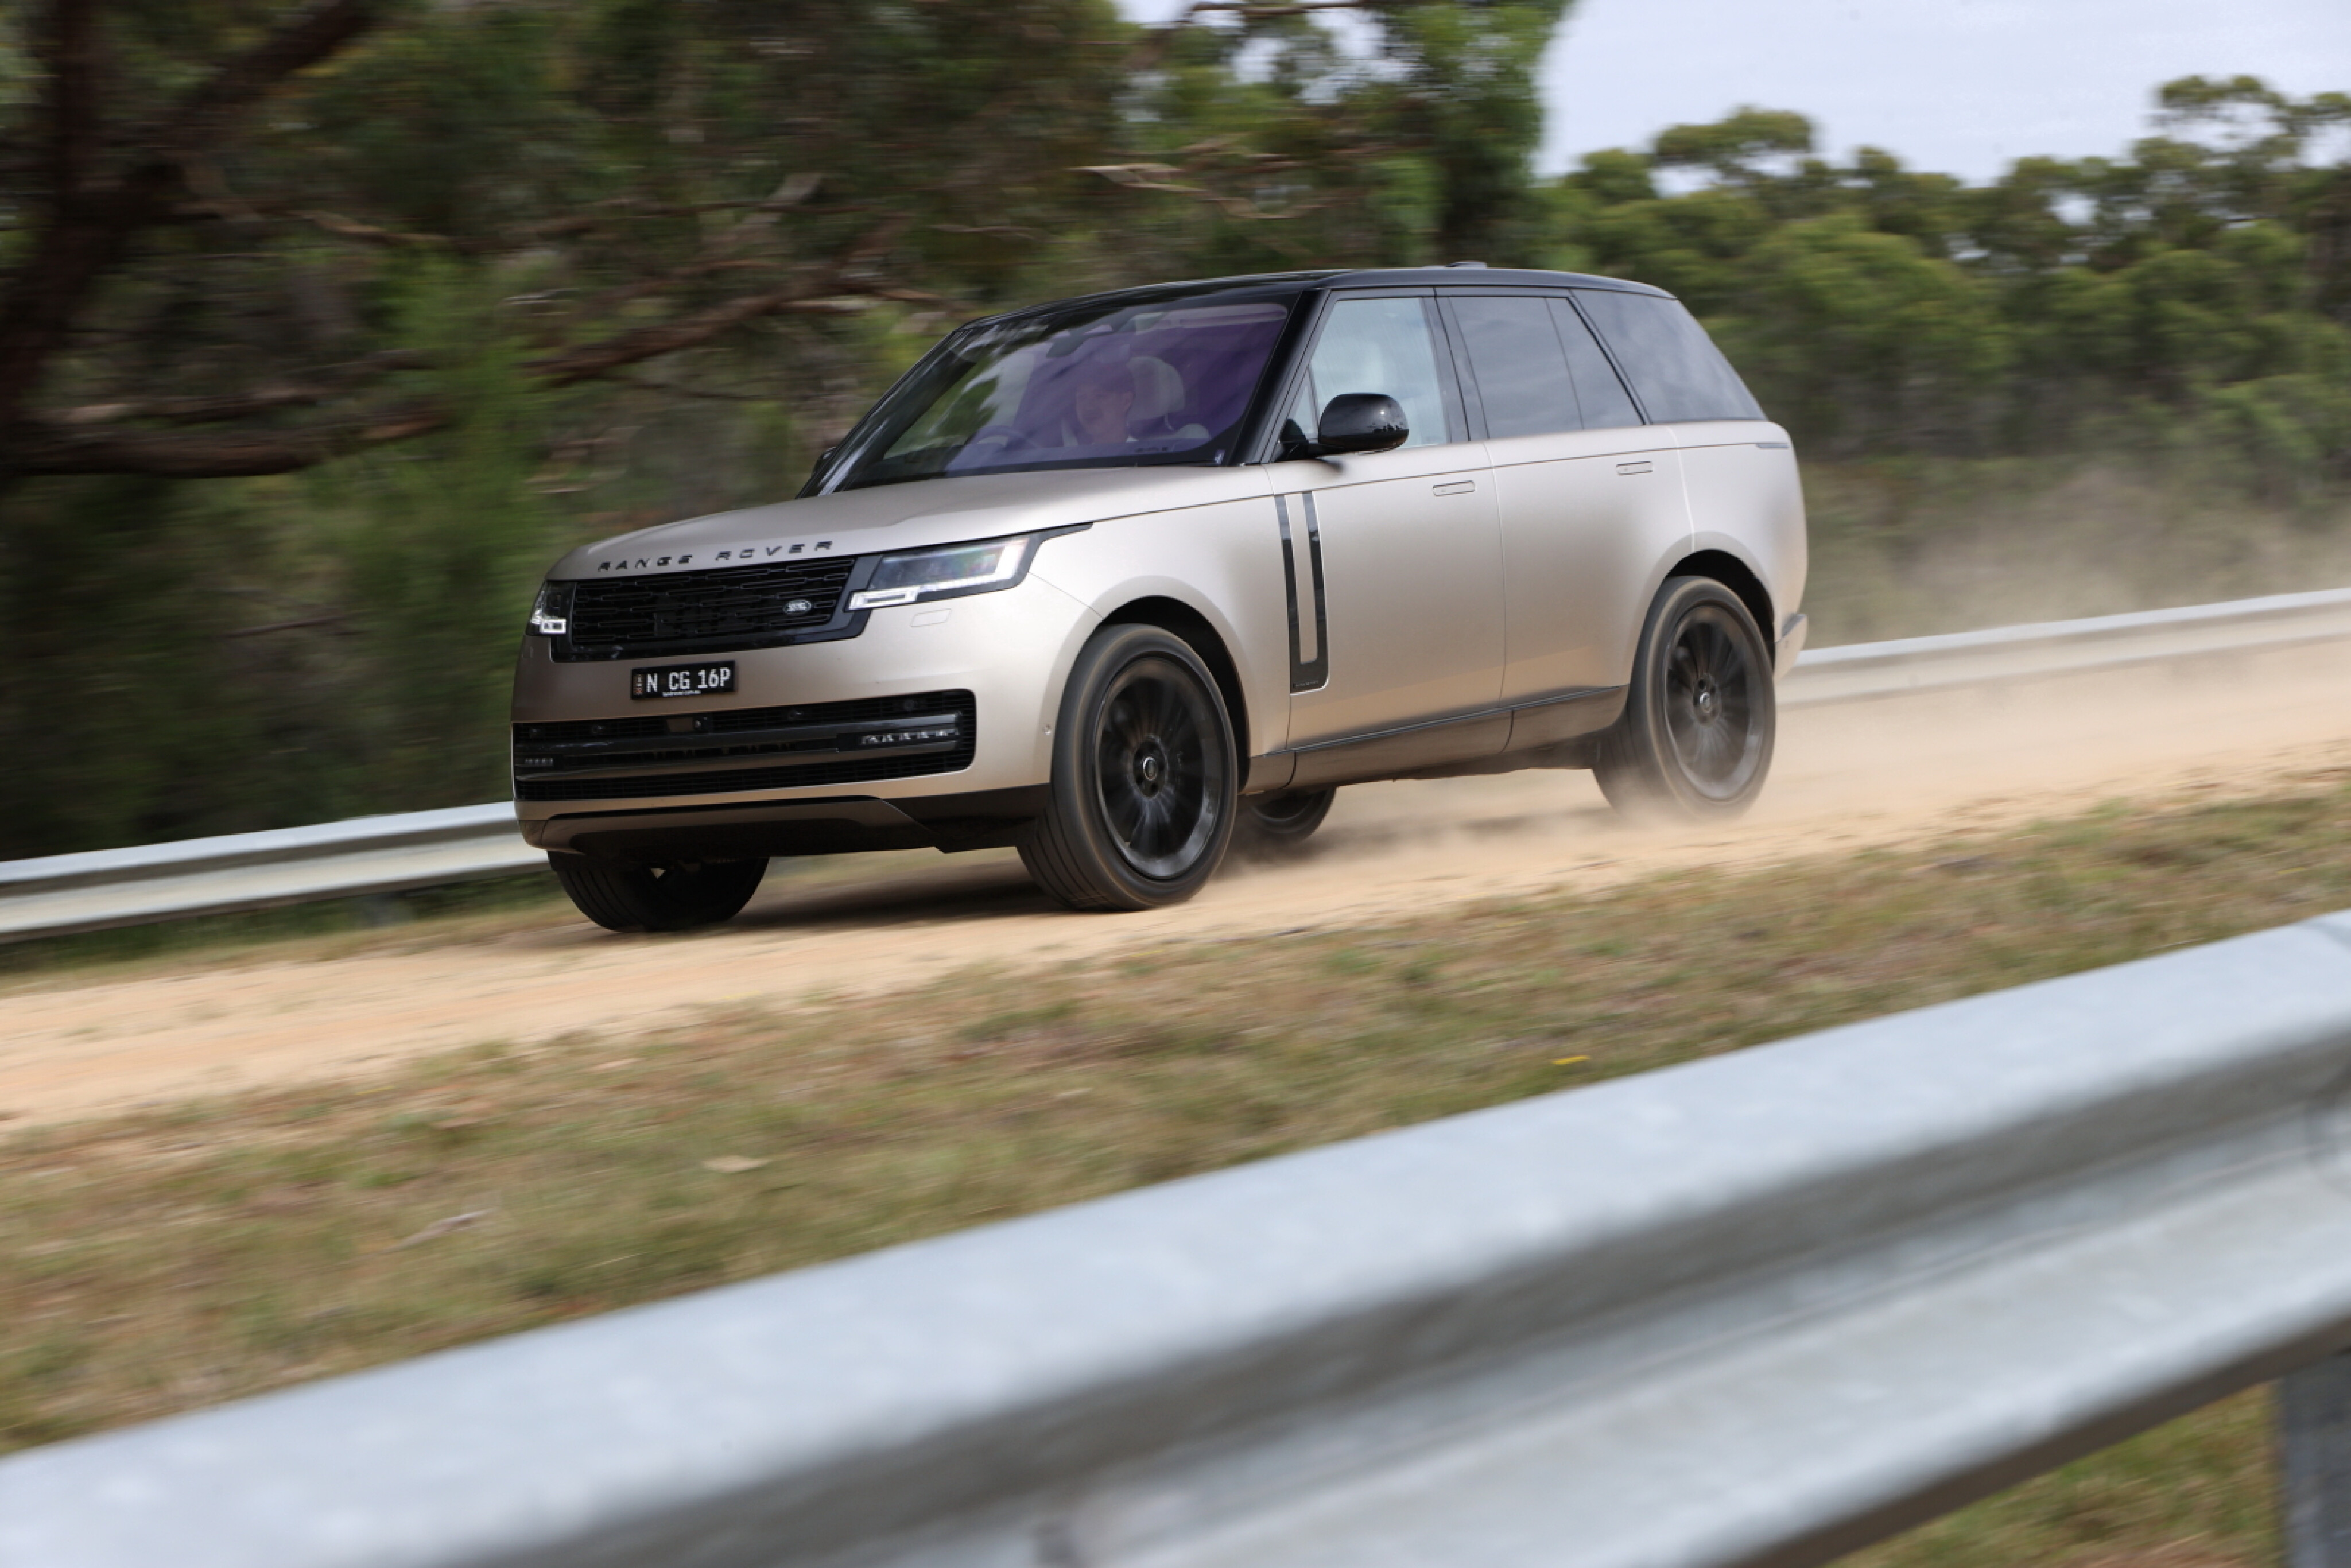 Electric Range Rover Evoque Launch In 2024, To Be Extended Range EV